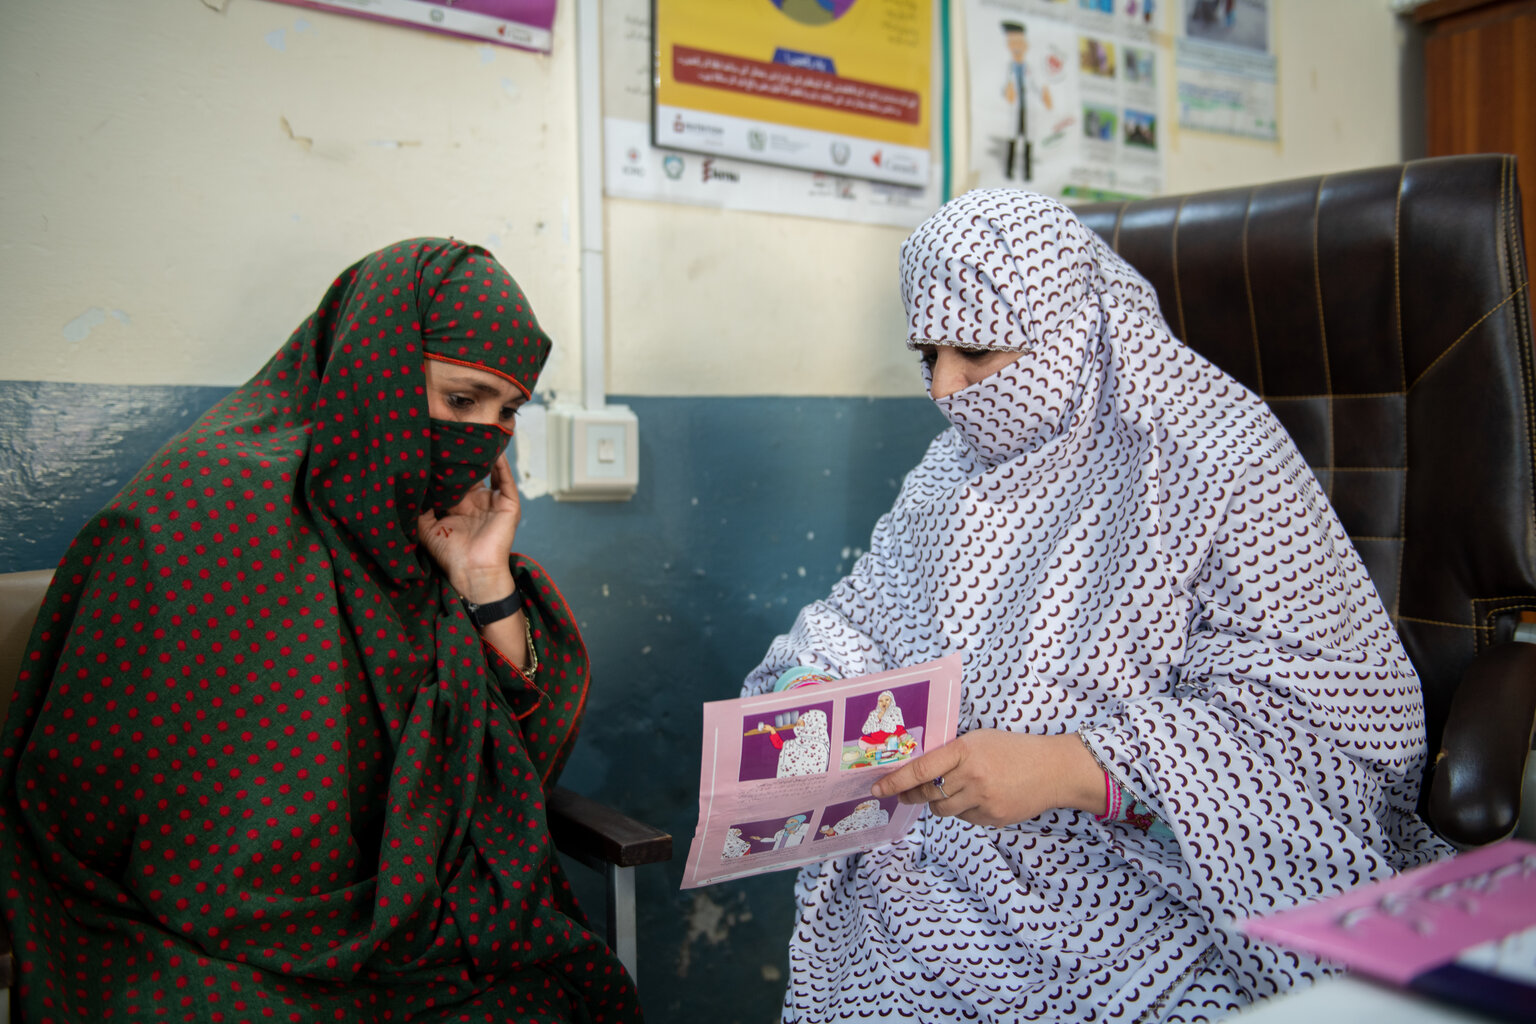 Two women sit beside each one. The woman on the left is wearing a green and red niqab and listening intently to the woman on the right who is wearing a white and red niqab. She is speaking and gesturing to a pamphlet on maternal nutrition.